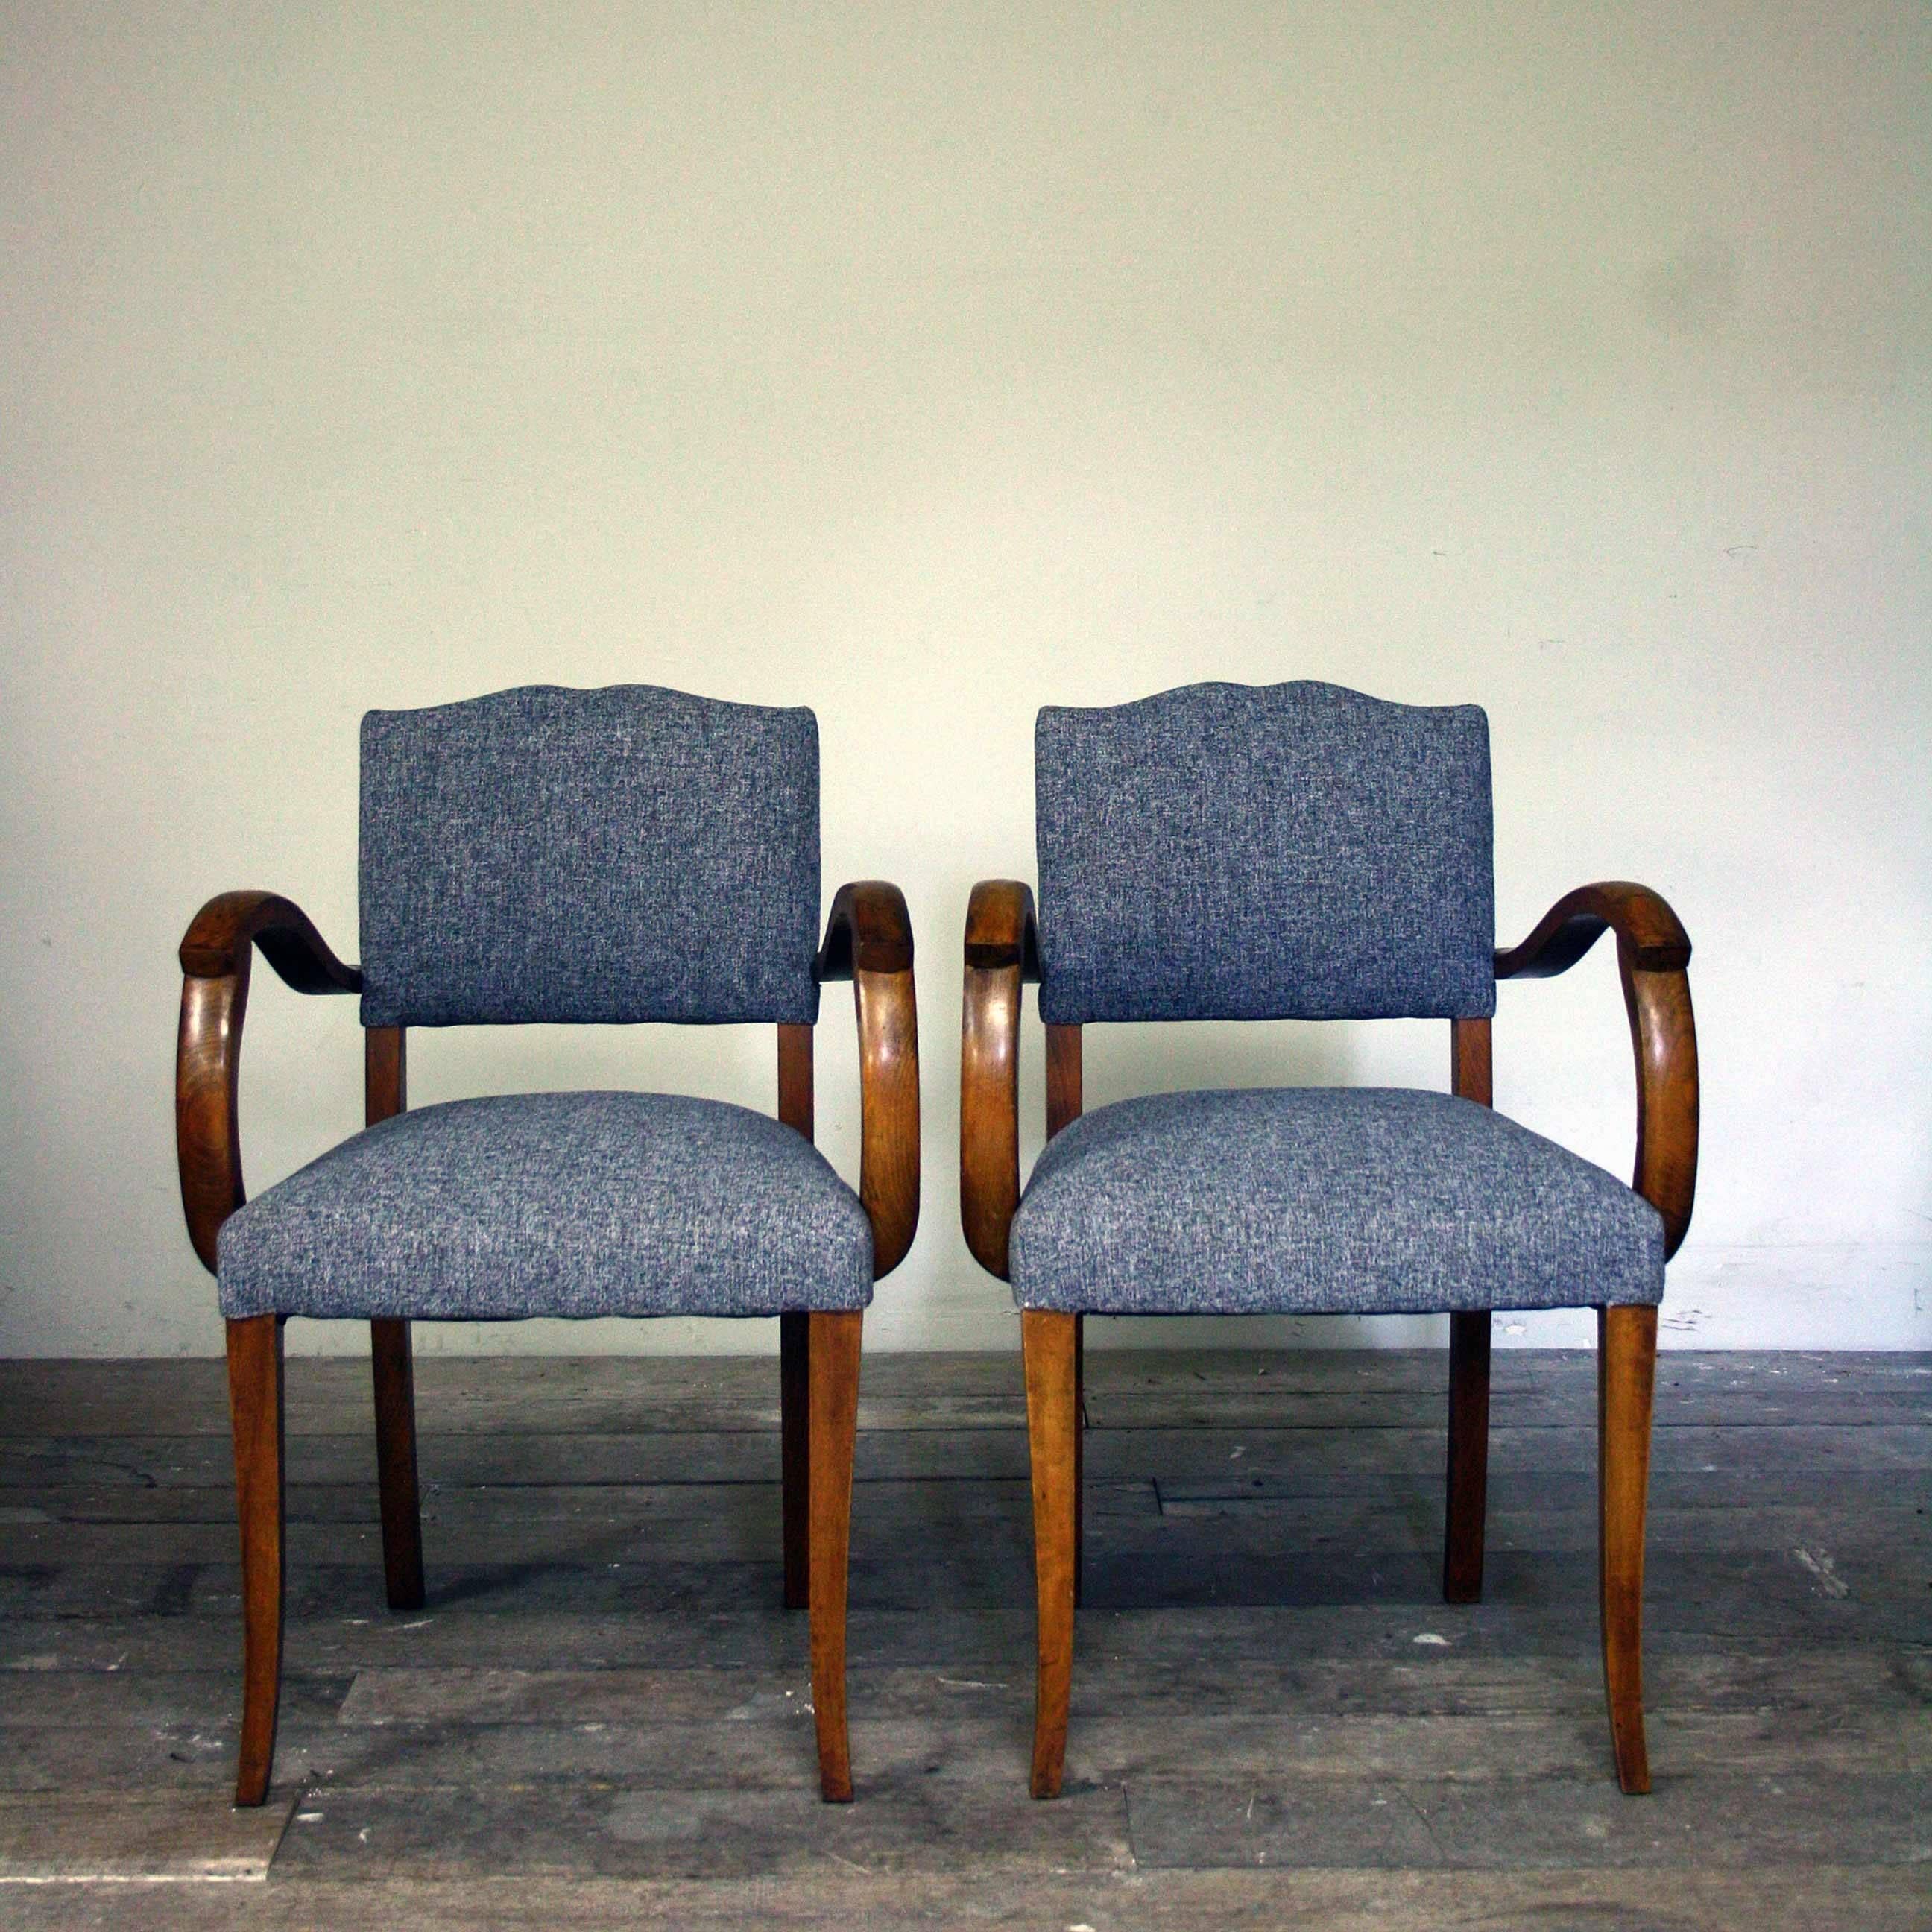 A stunning flecked grey linen reupholstered pair of 1950s moustache back bridge chairs with unusual 